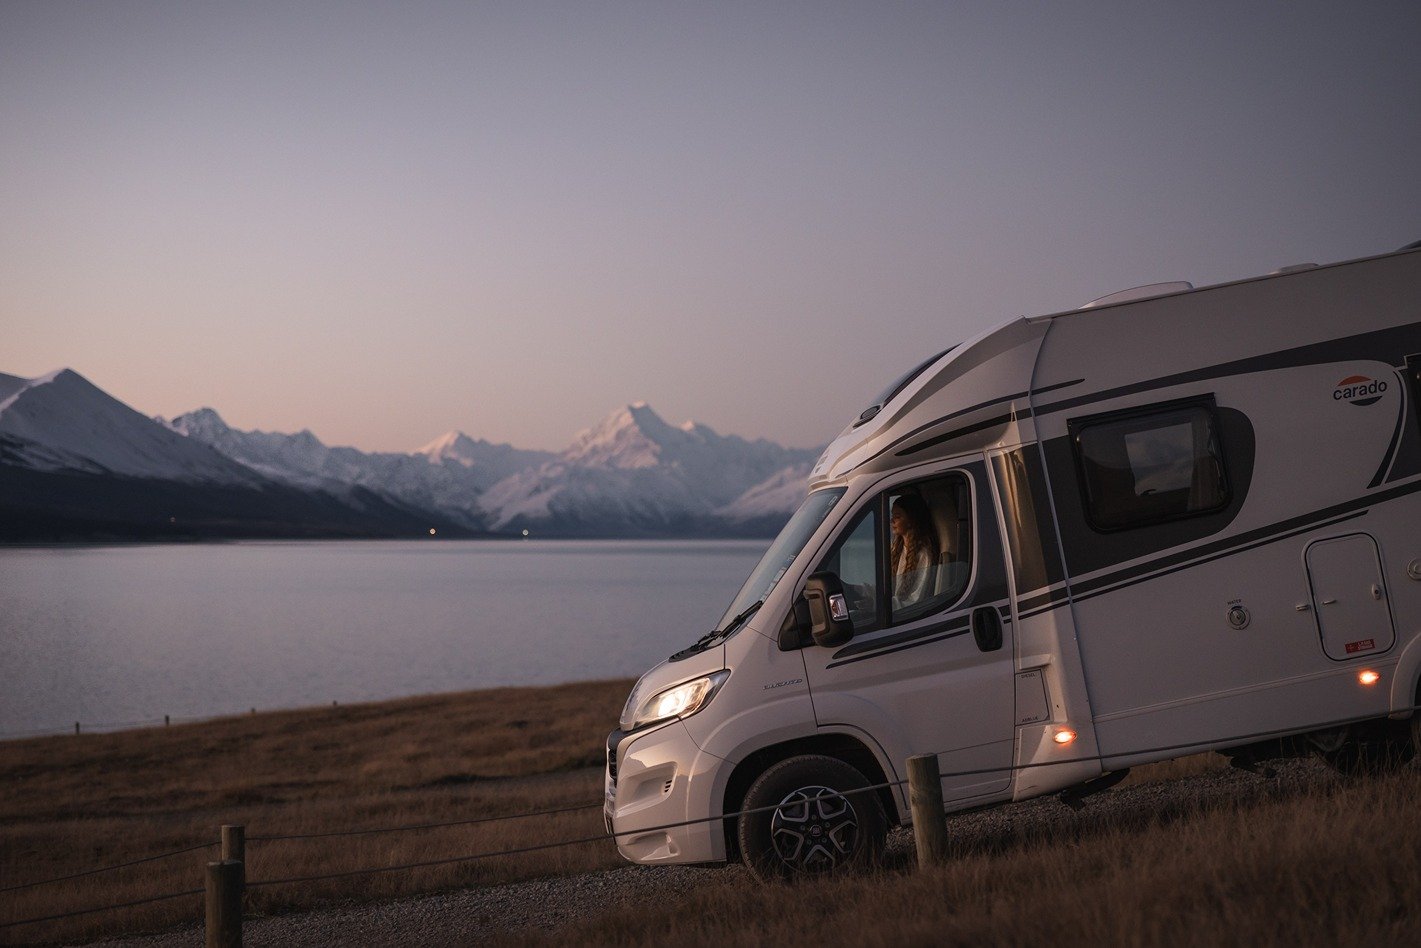 Traveller driving the motorhome with mountain background